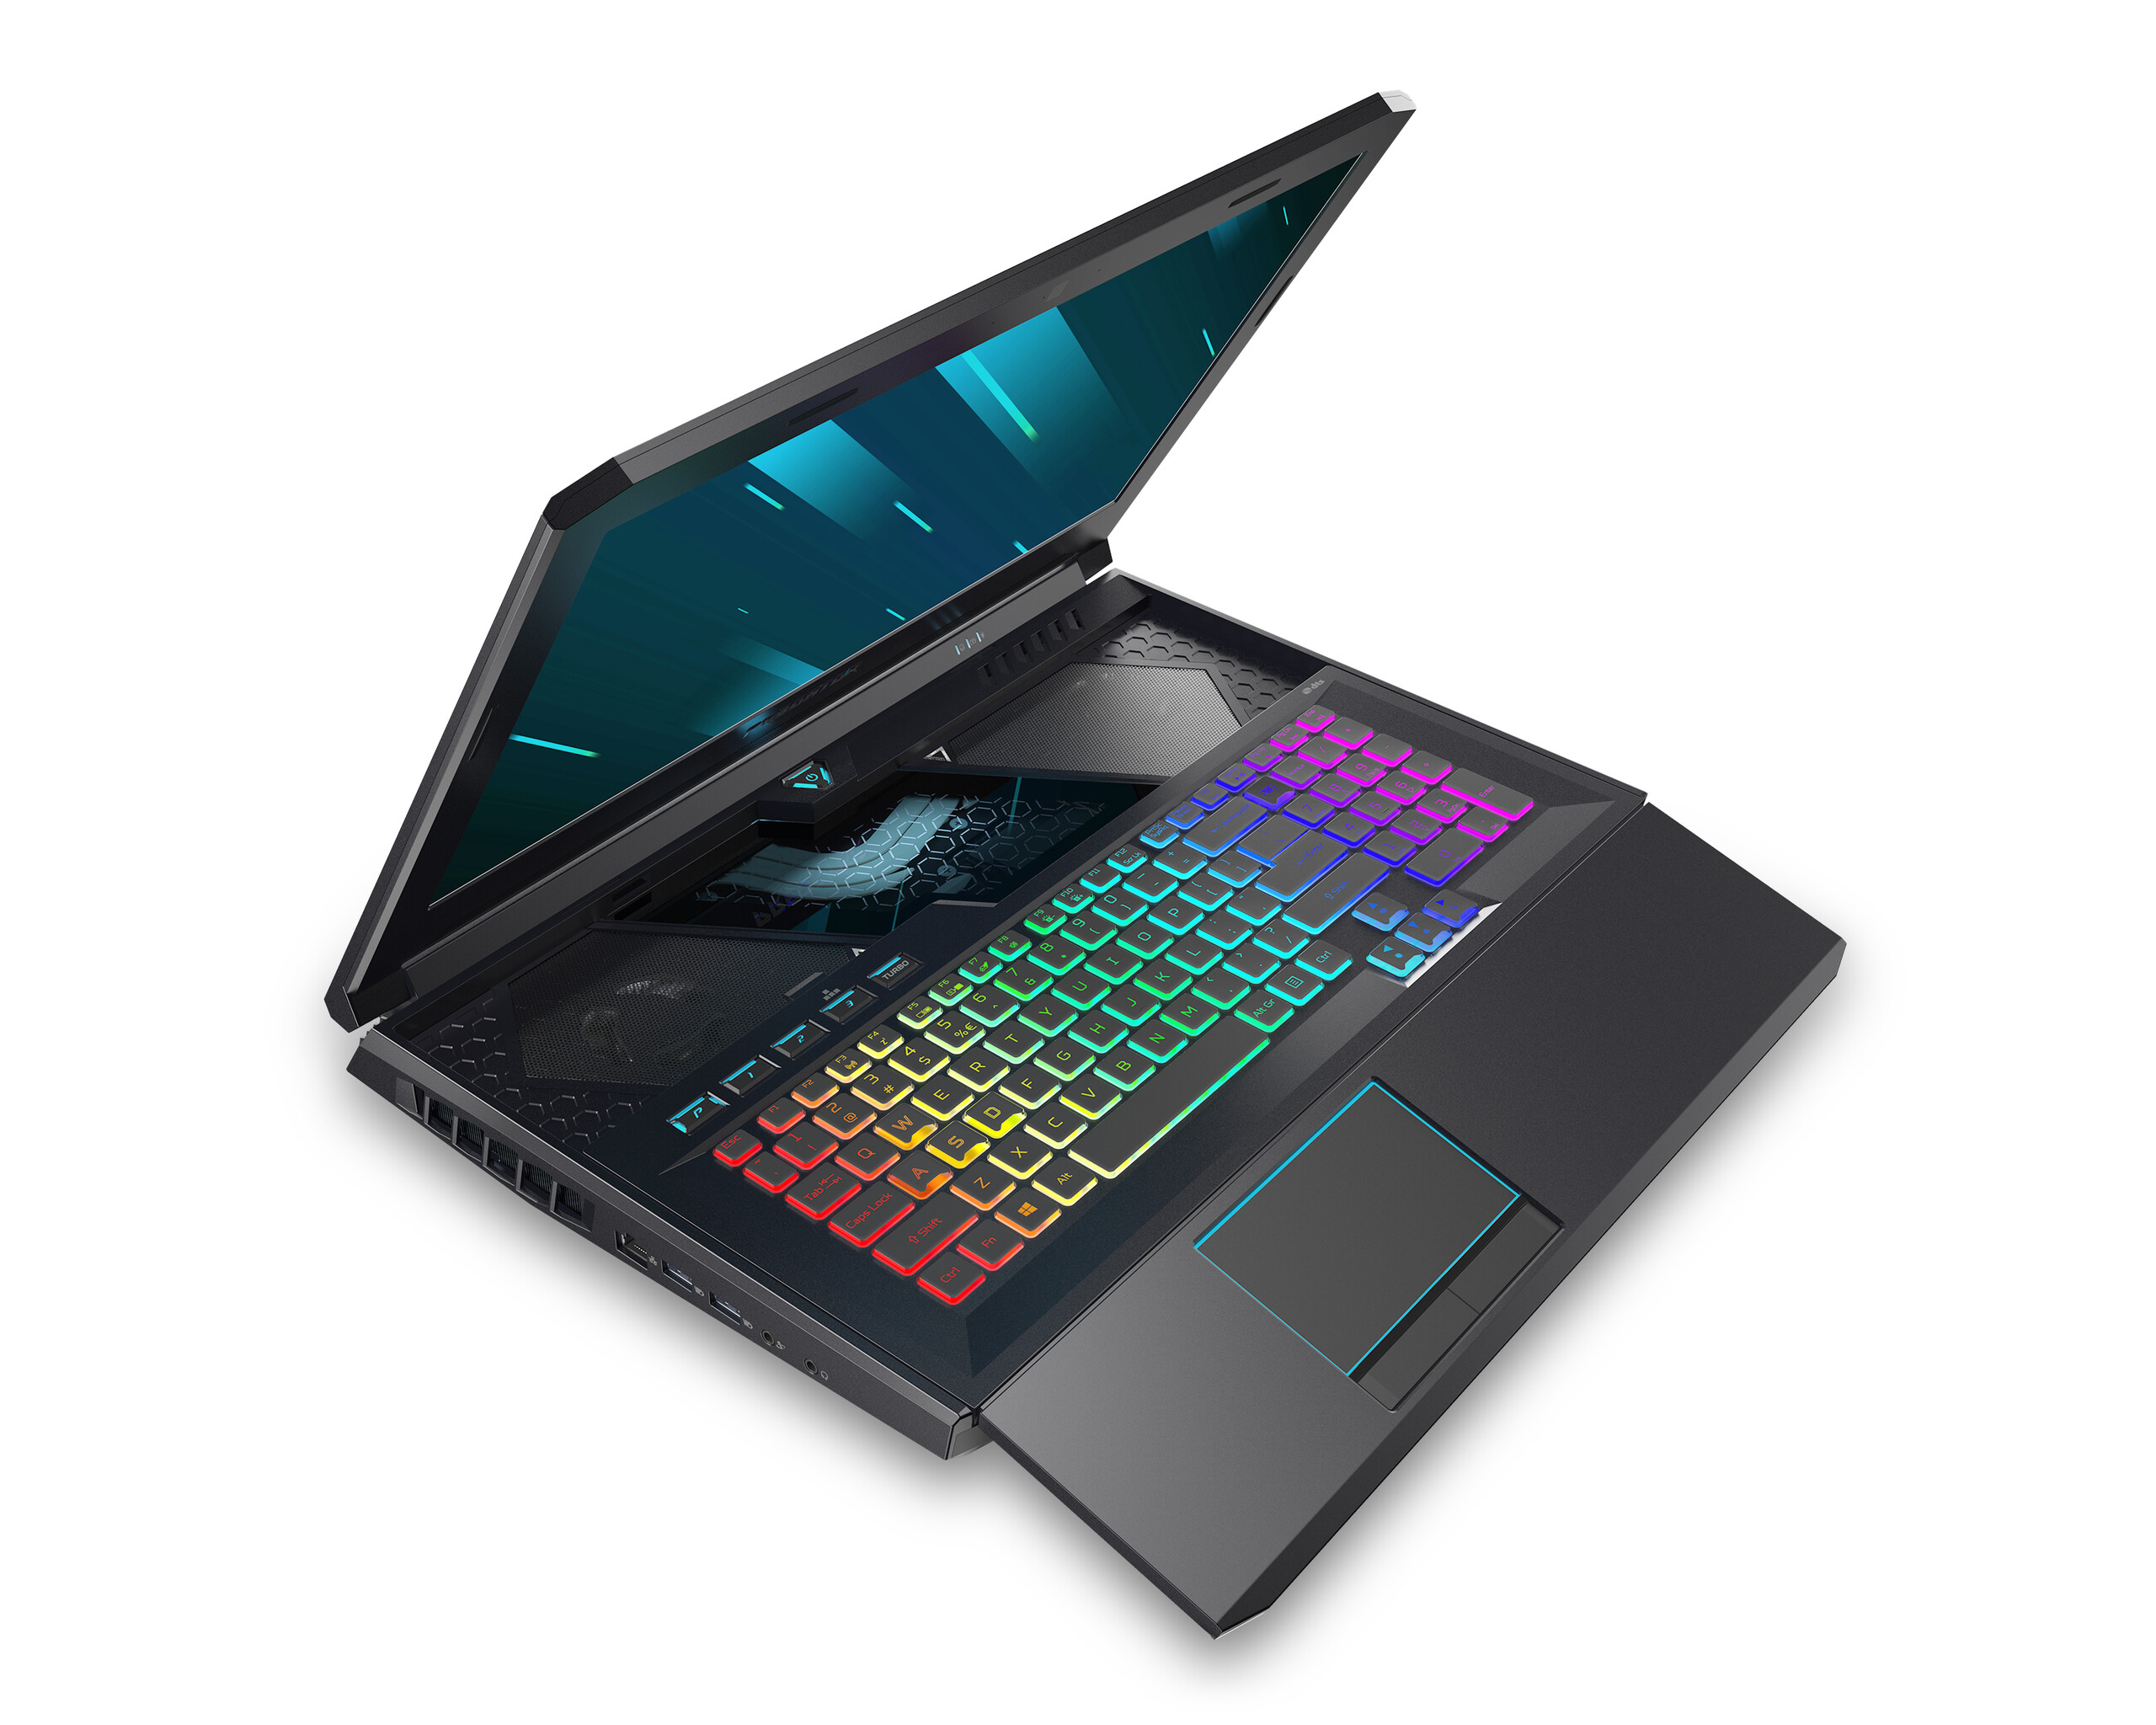 krystal blast Envision Acer Predator Helios 700: The innovative gaming laptop returns with up to  an Intel Core i9-10980HK, an NVIDIA GeForce RTX 2080 SUPER GPUs and faster  RAM - NotebookCheck.net News